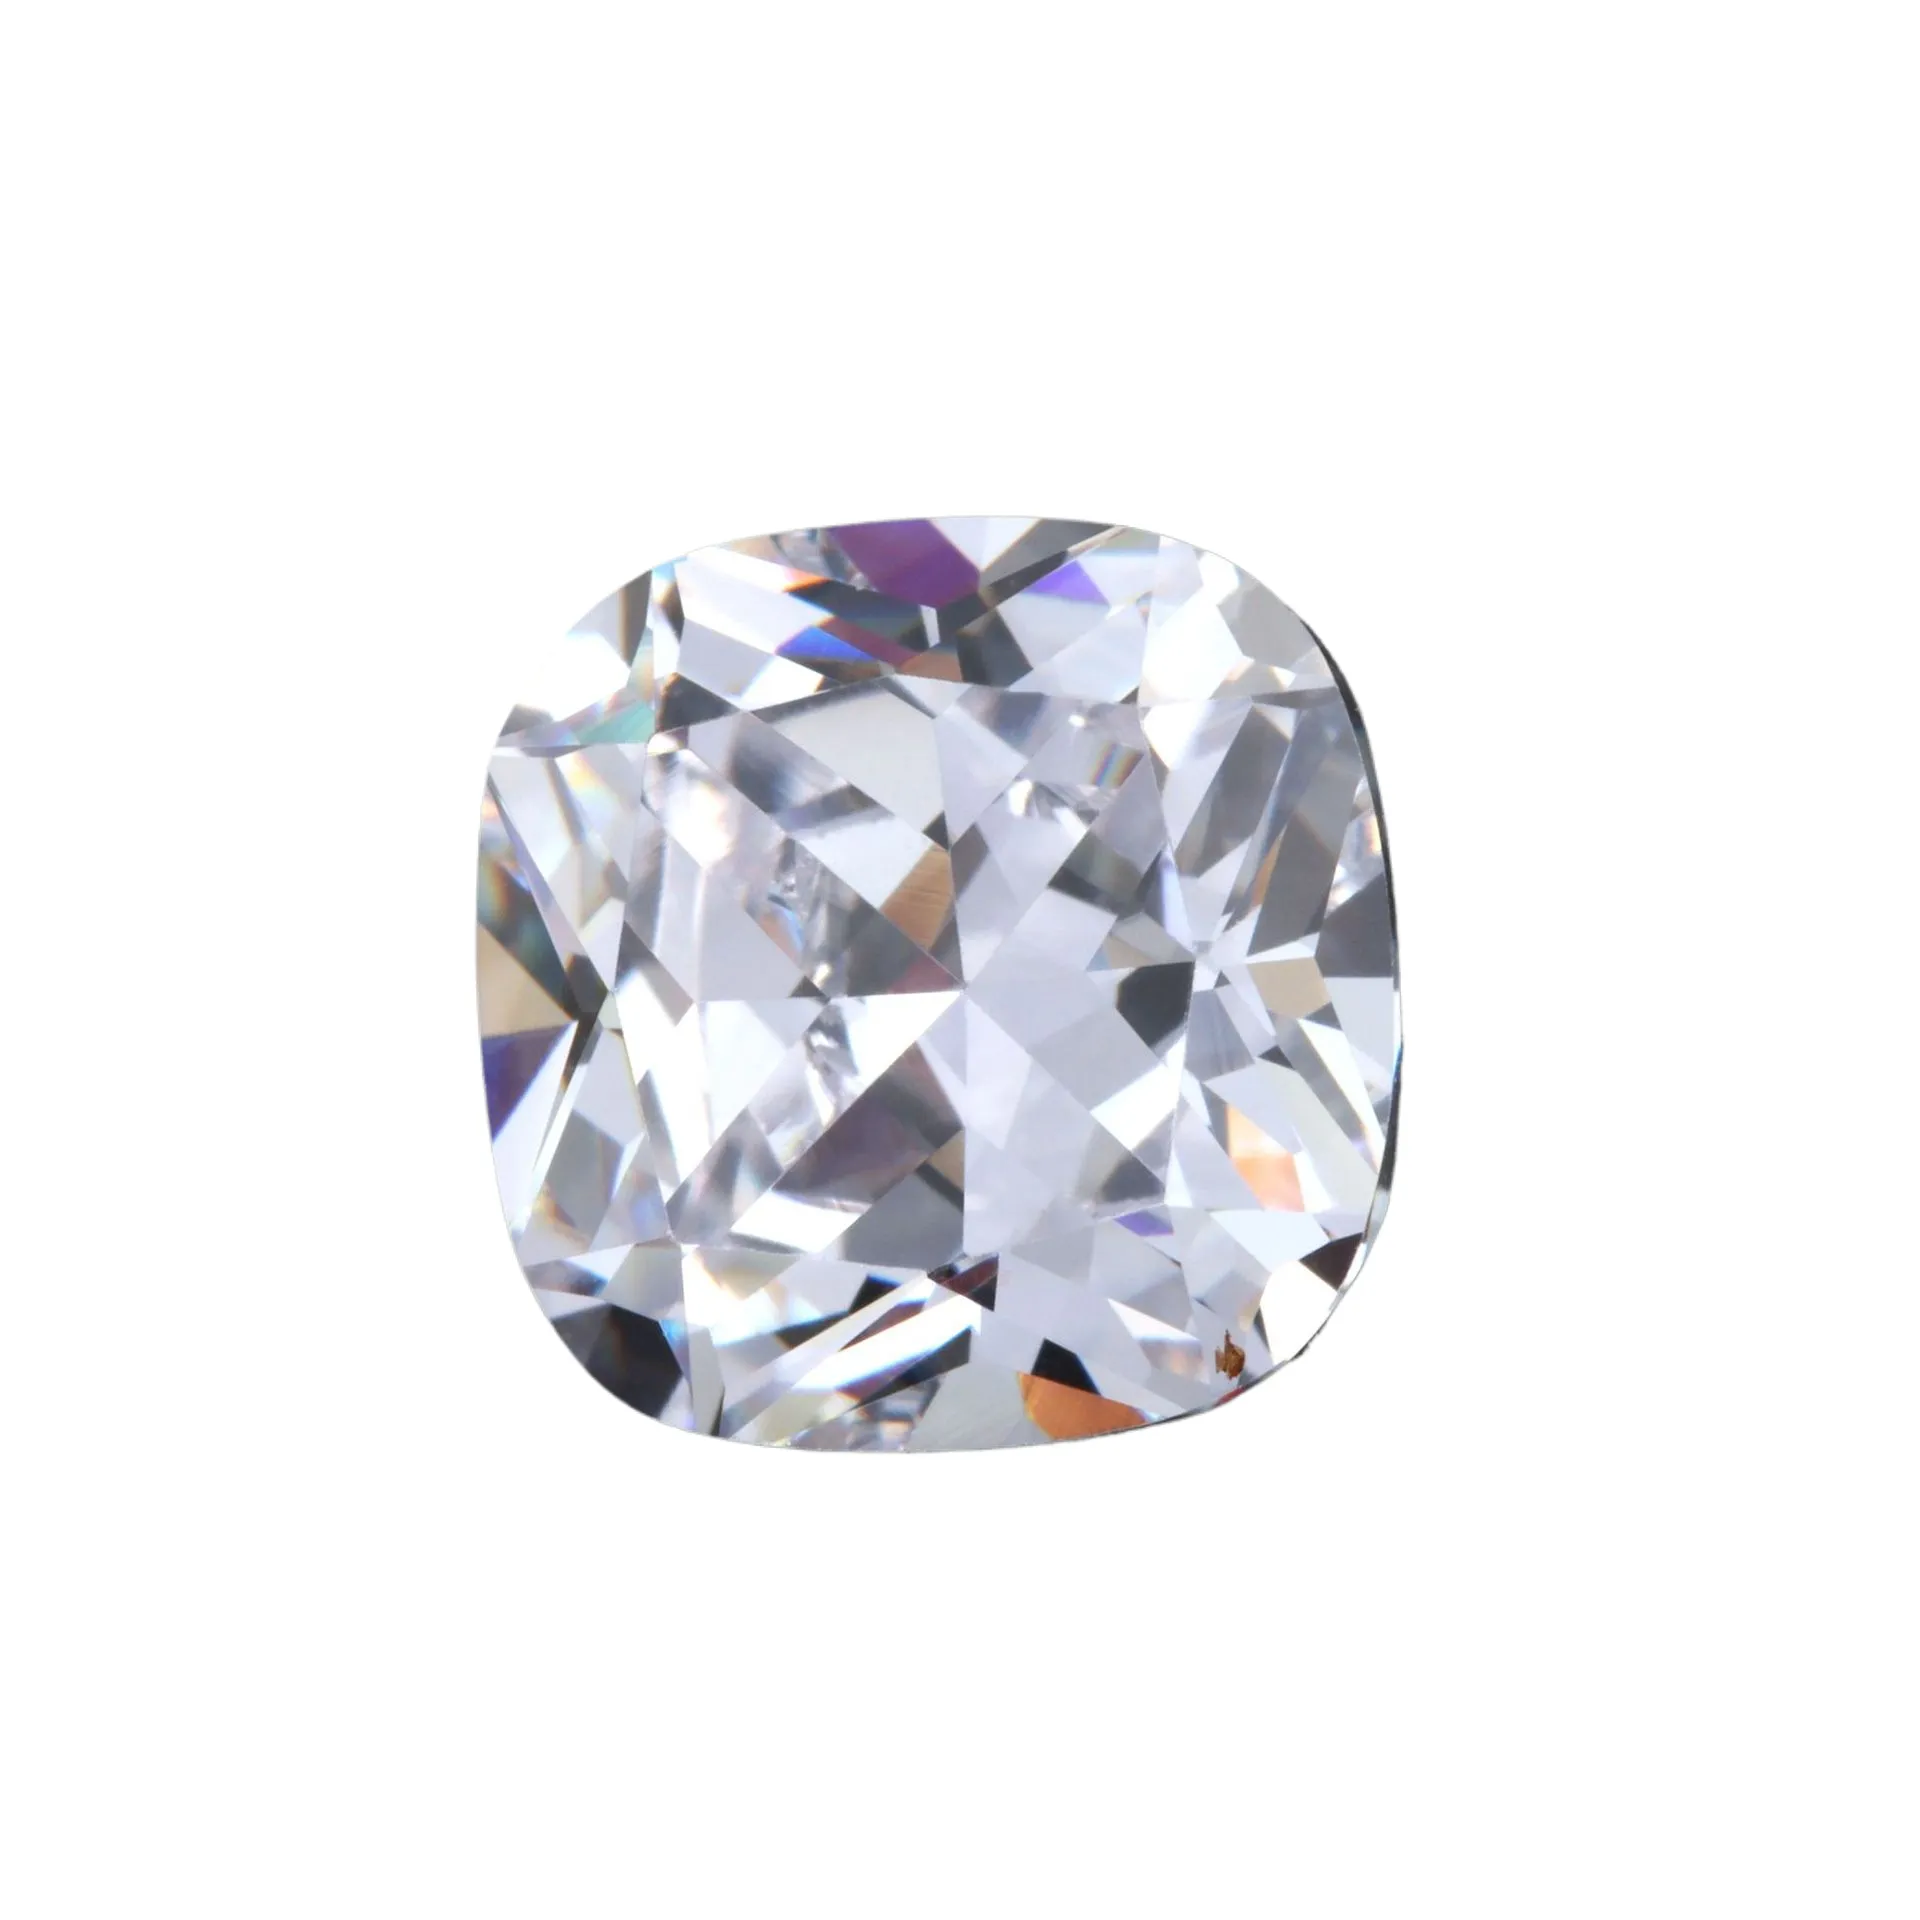 Radiant Cut Best Grade D Color More Shiny Than Diamond Certified Stone For Jewelry Loose Moissanite Stone